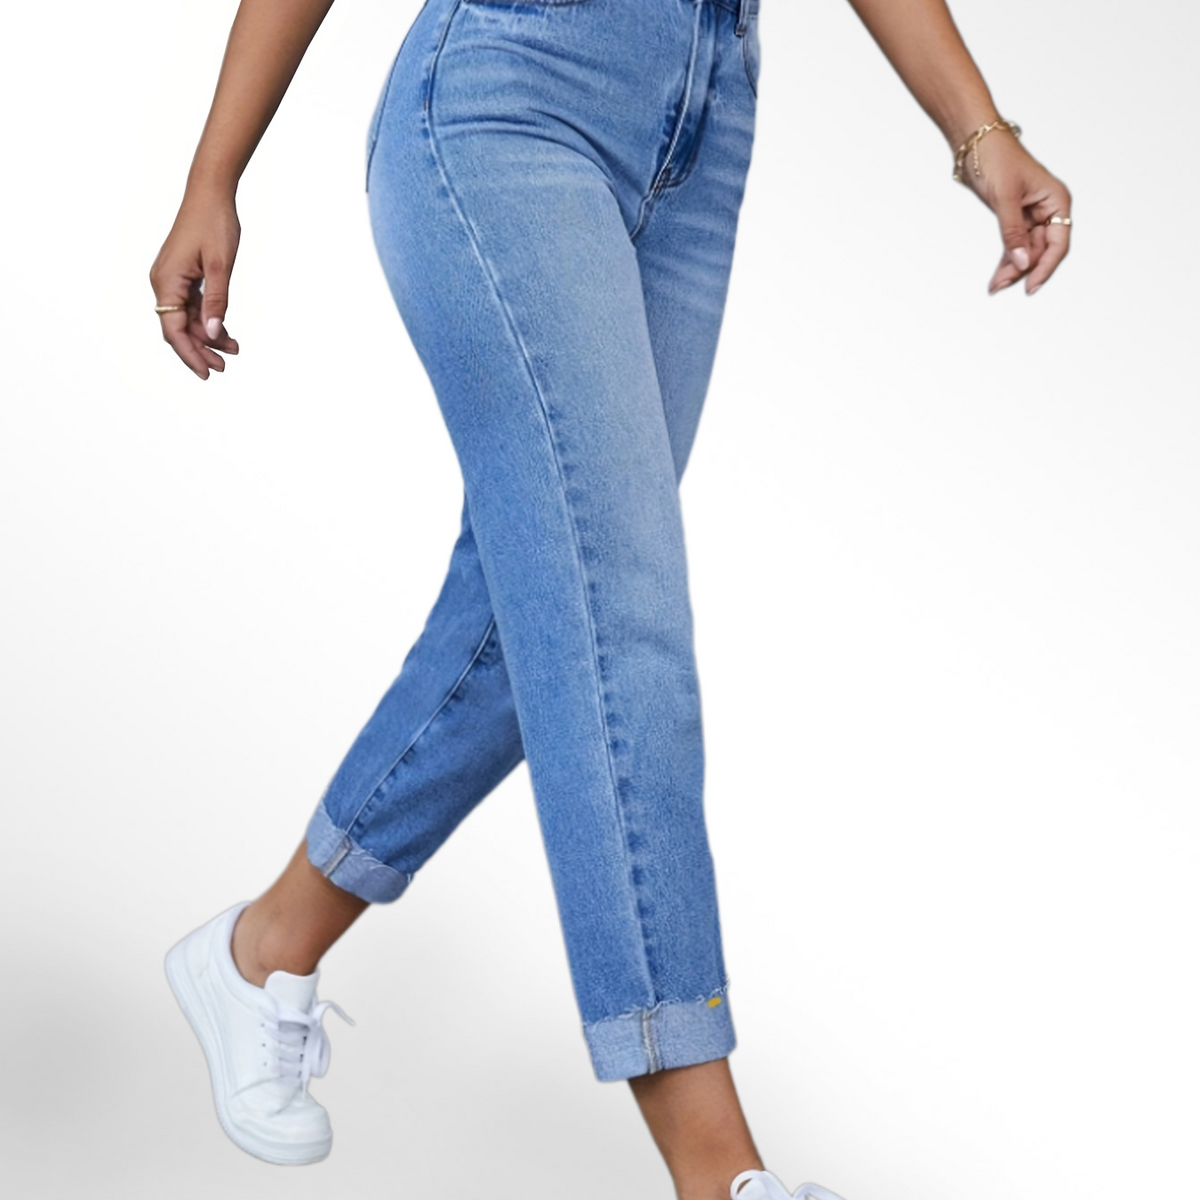 「lovevop」Cuffed Light Wash Blue High Rise Cropped Jeans, Water Ripple Embossed Fayed Trim Denim Pants, Casual & Street Style, Women's Denim Jeans & Clothing